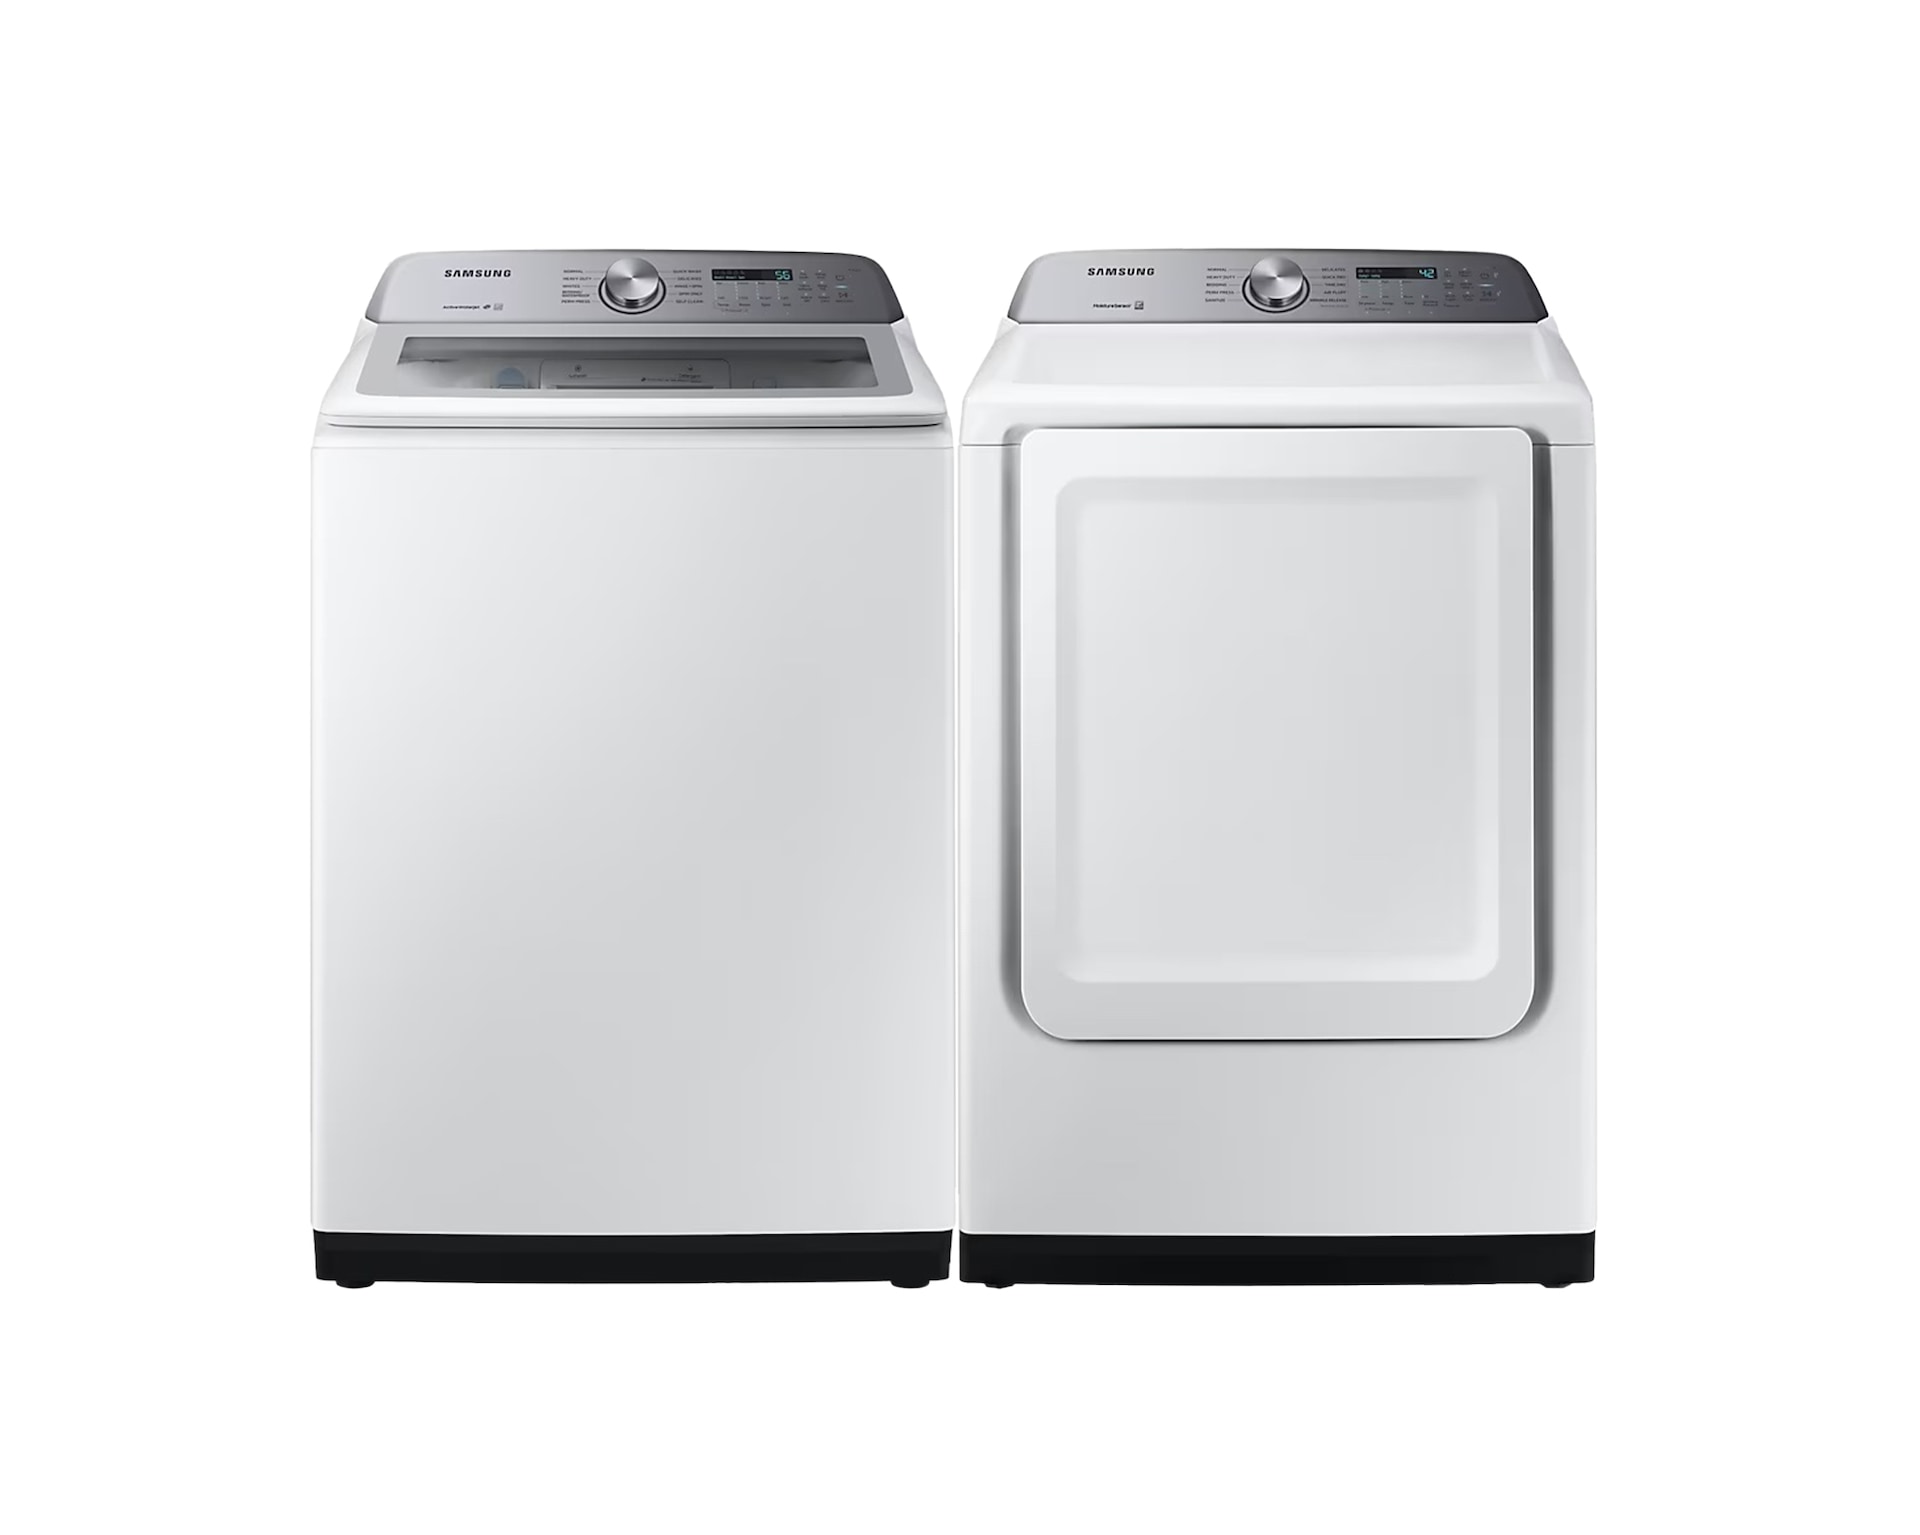 Image of Samsung 5.8 Cu.Ft. Top Load Washer with EZ Access Drum and 7.4 Cu.Ft. Electric Dryer with Energy Star Certification Pair